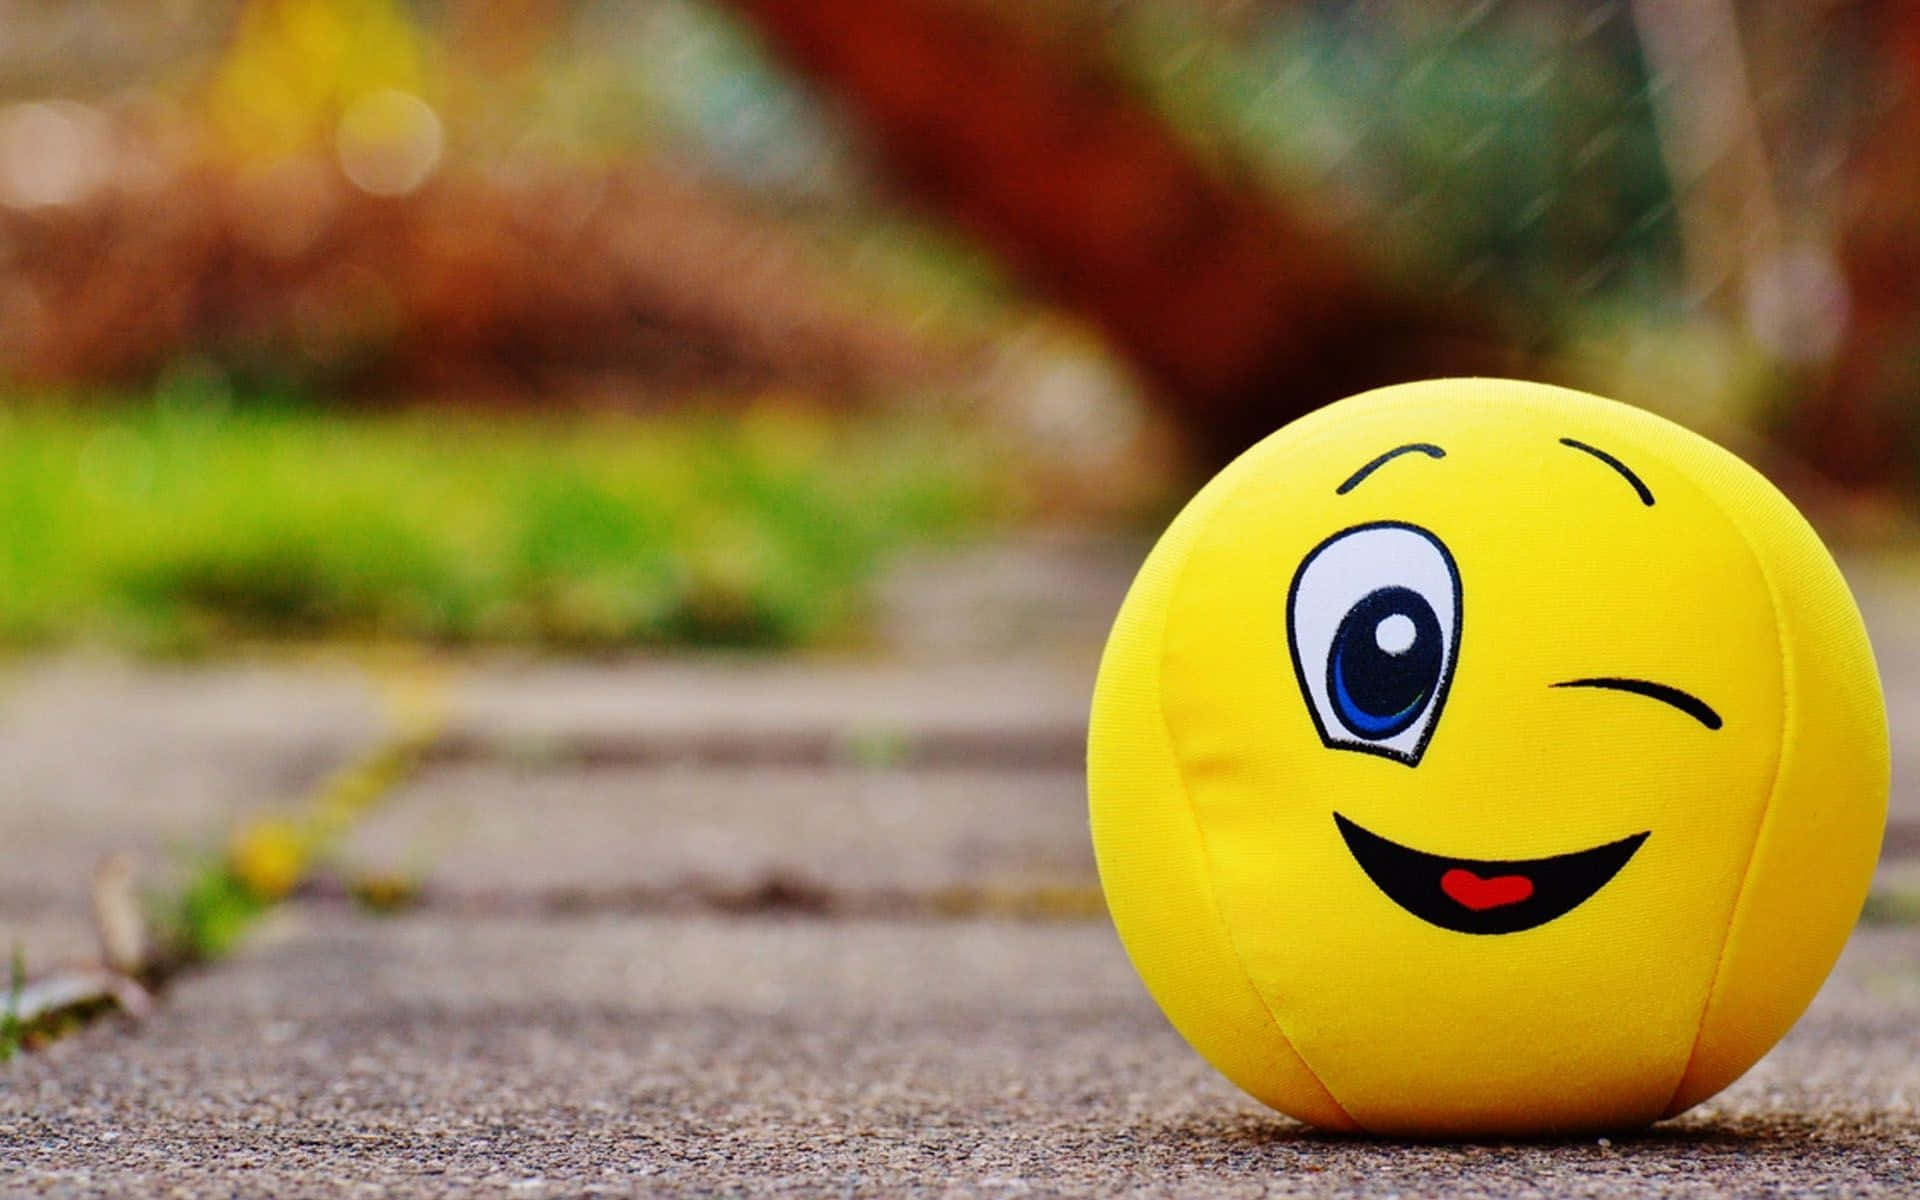 Winking Smile Face Plush Toy On Paved Road Picture